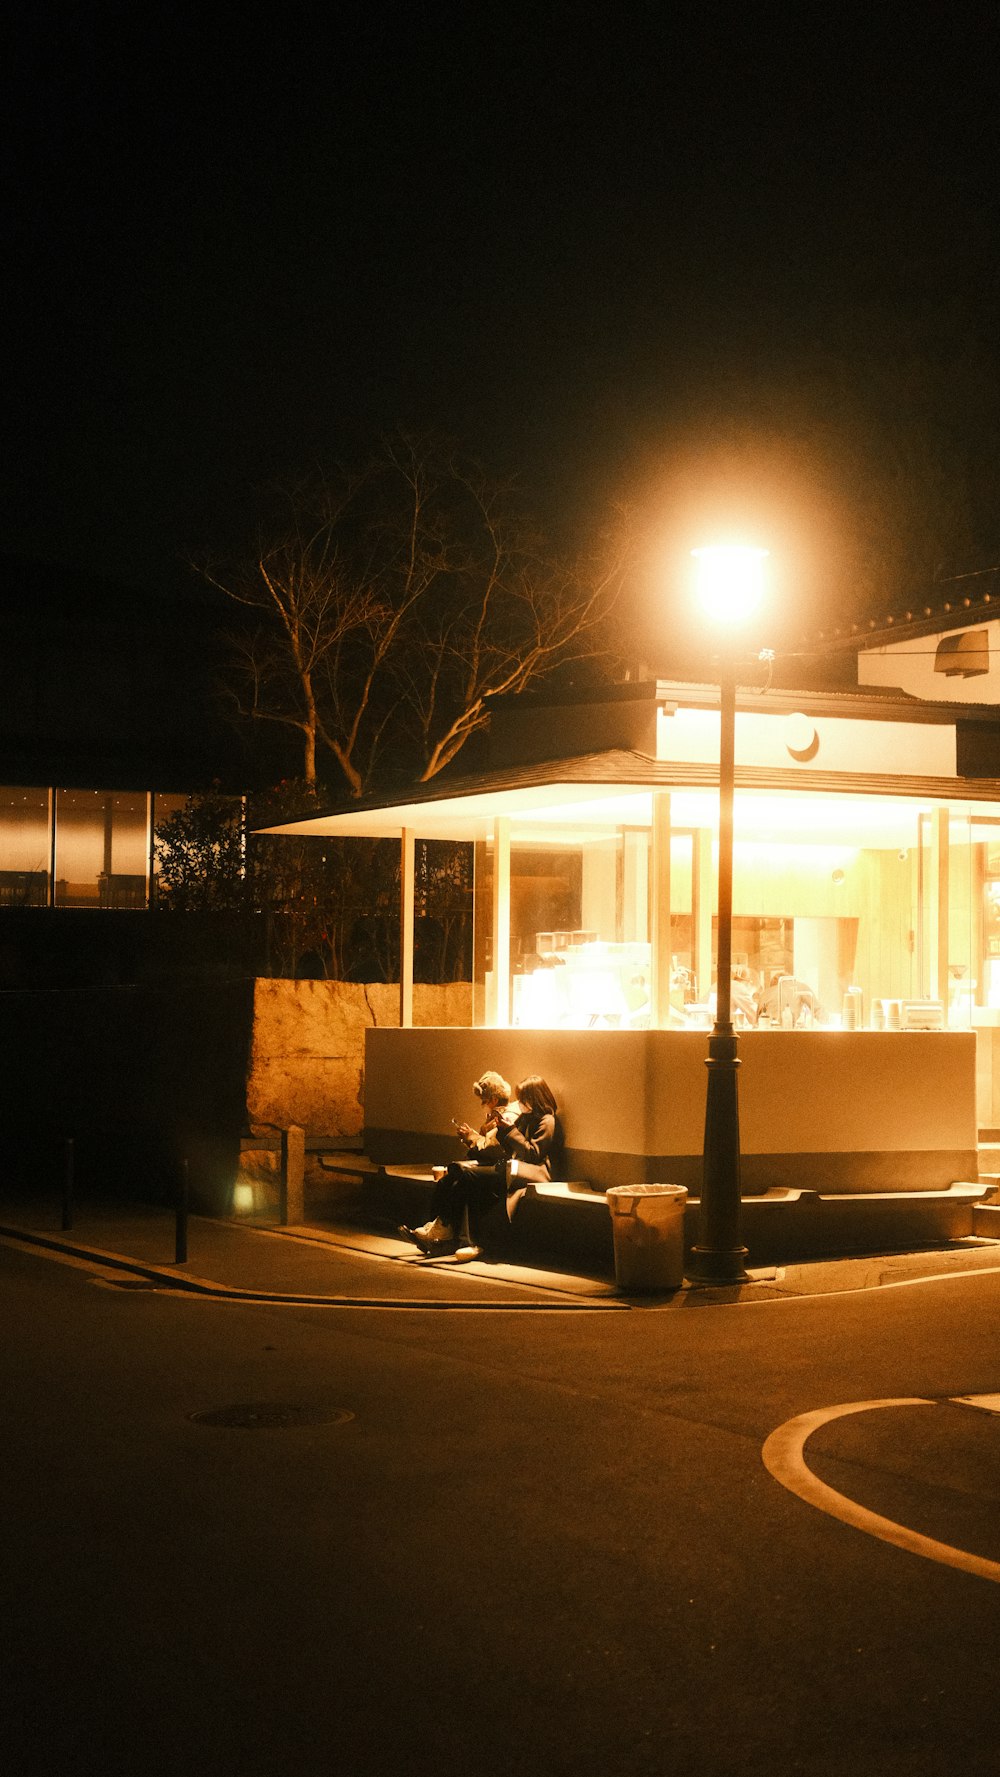 a person sitting on a bench in front of a building at night